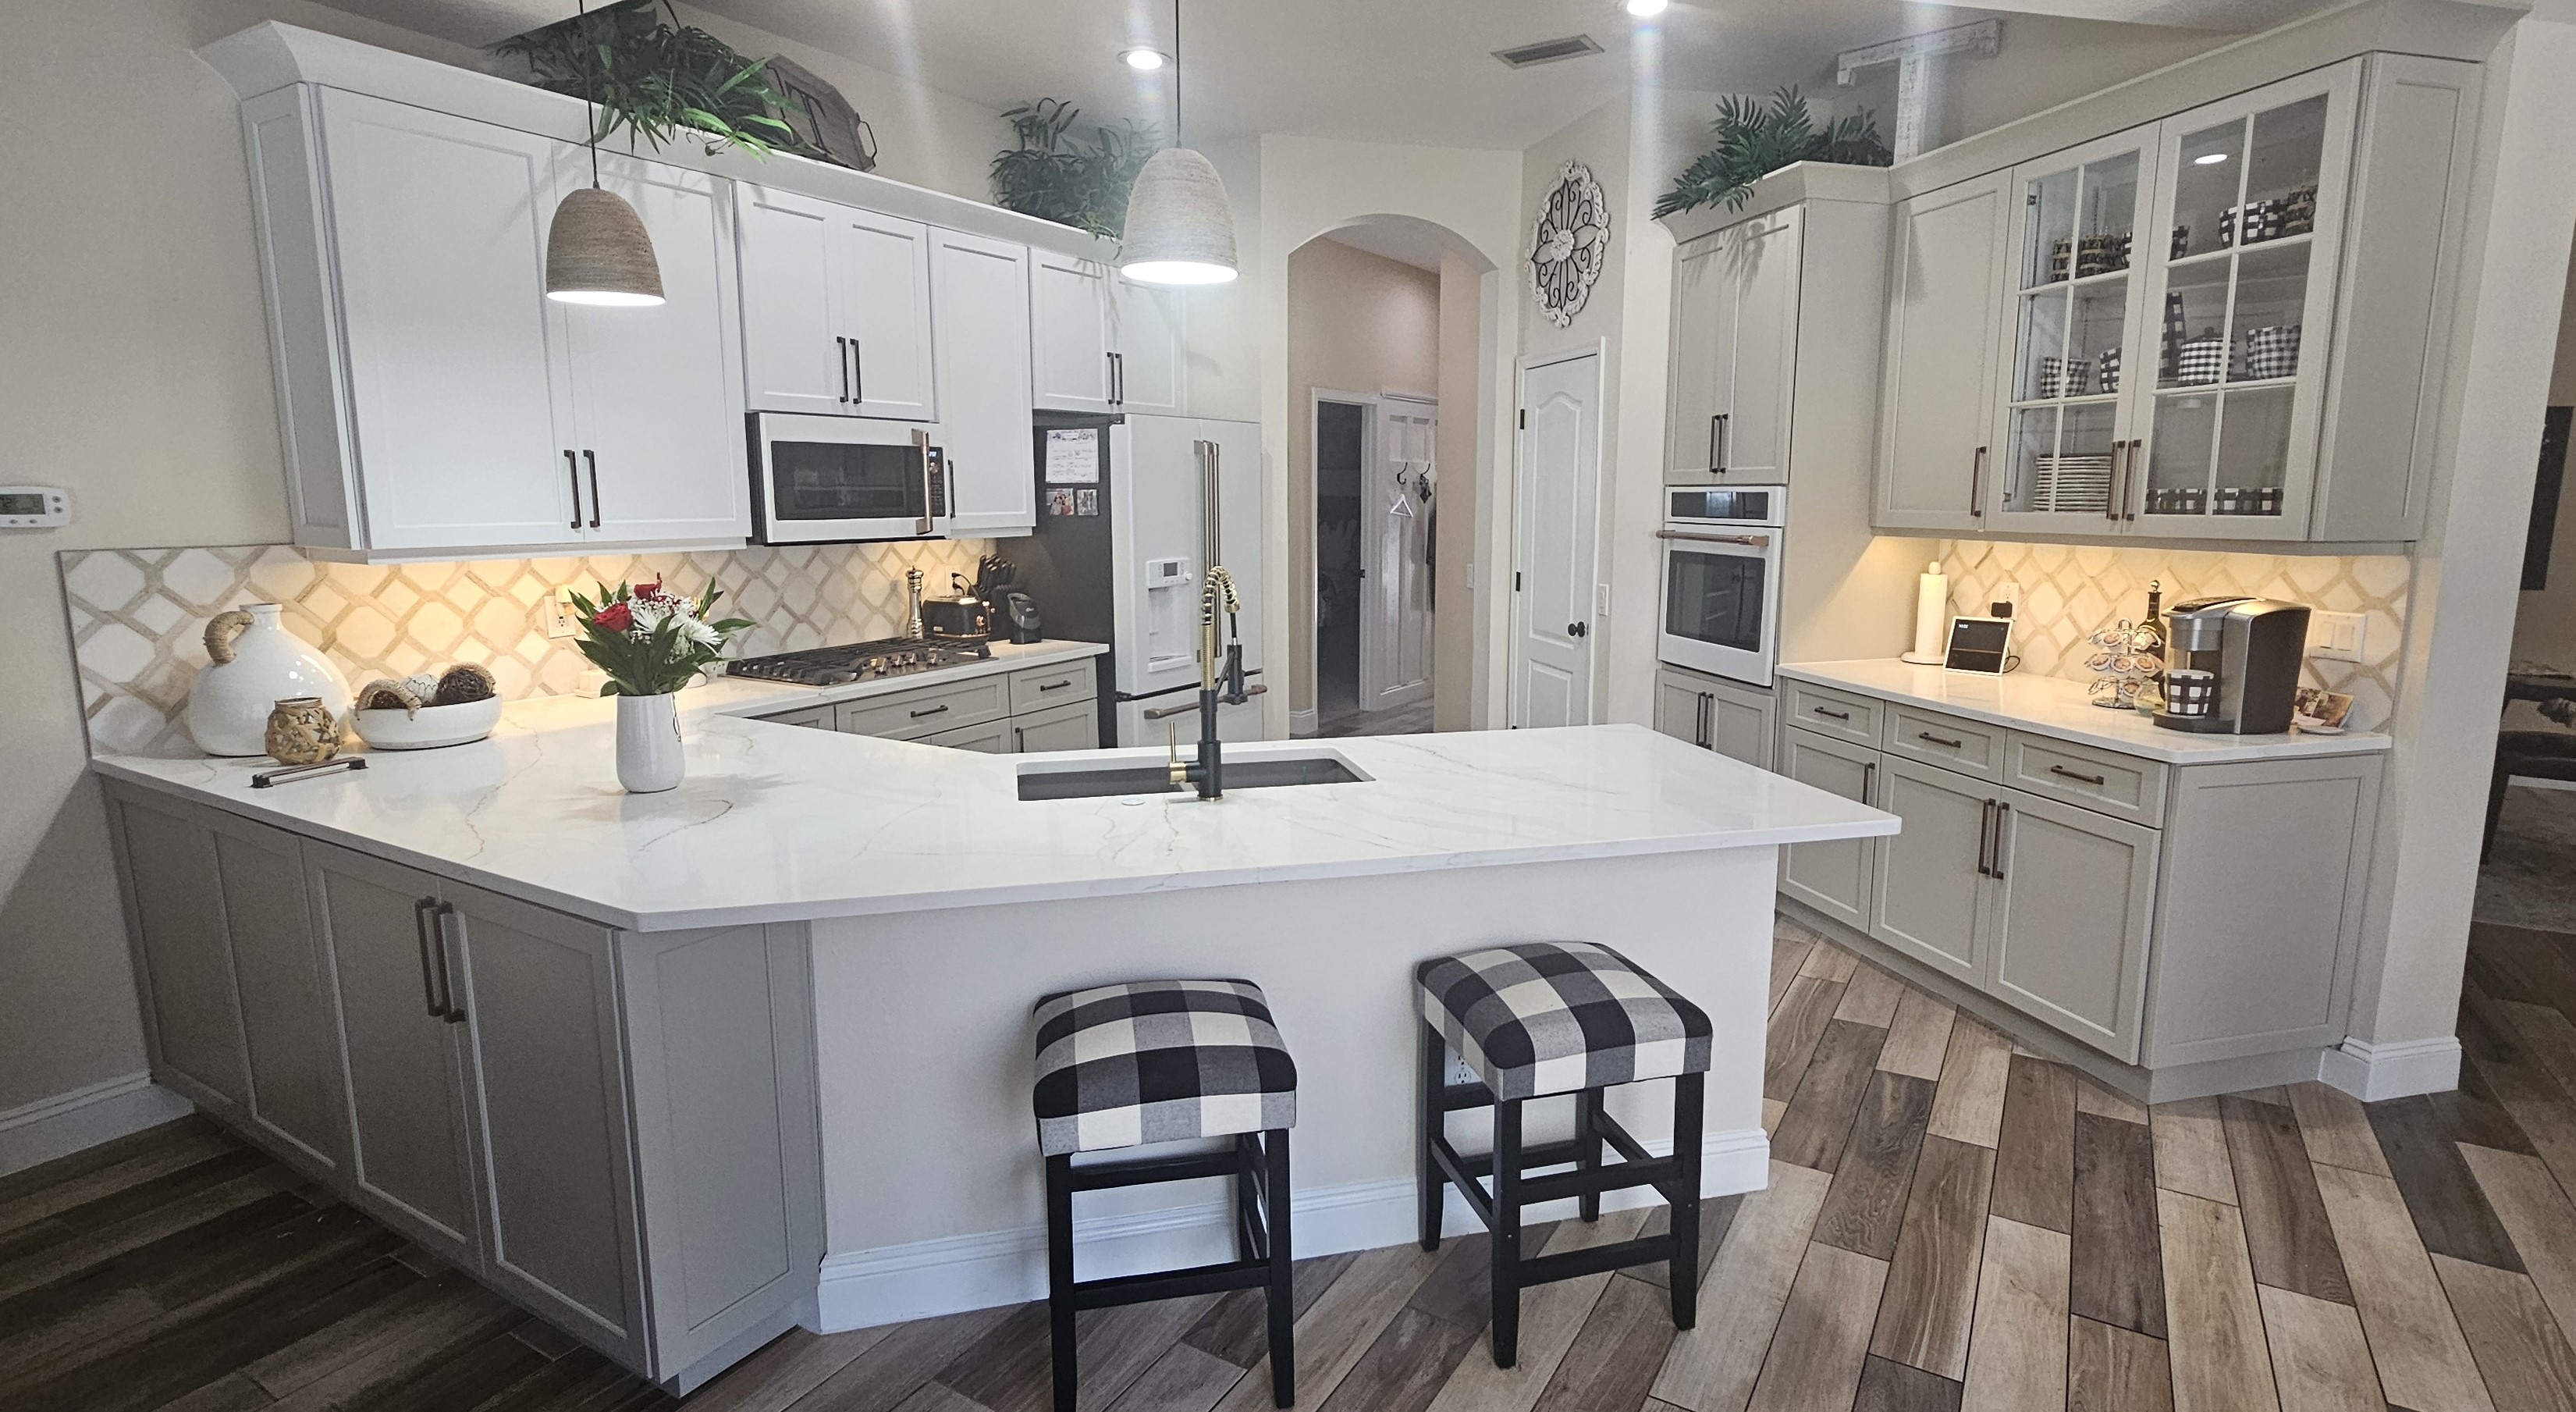 Modern appliances with a high-quality finish, granite worktops, and sleek white kitchen cabinets in Lutz.